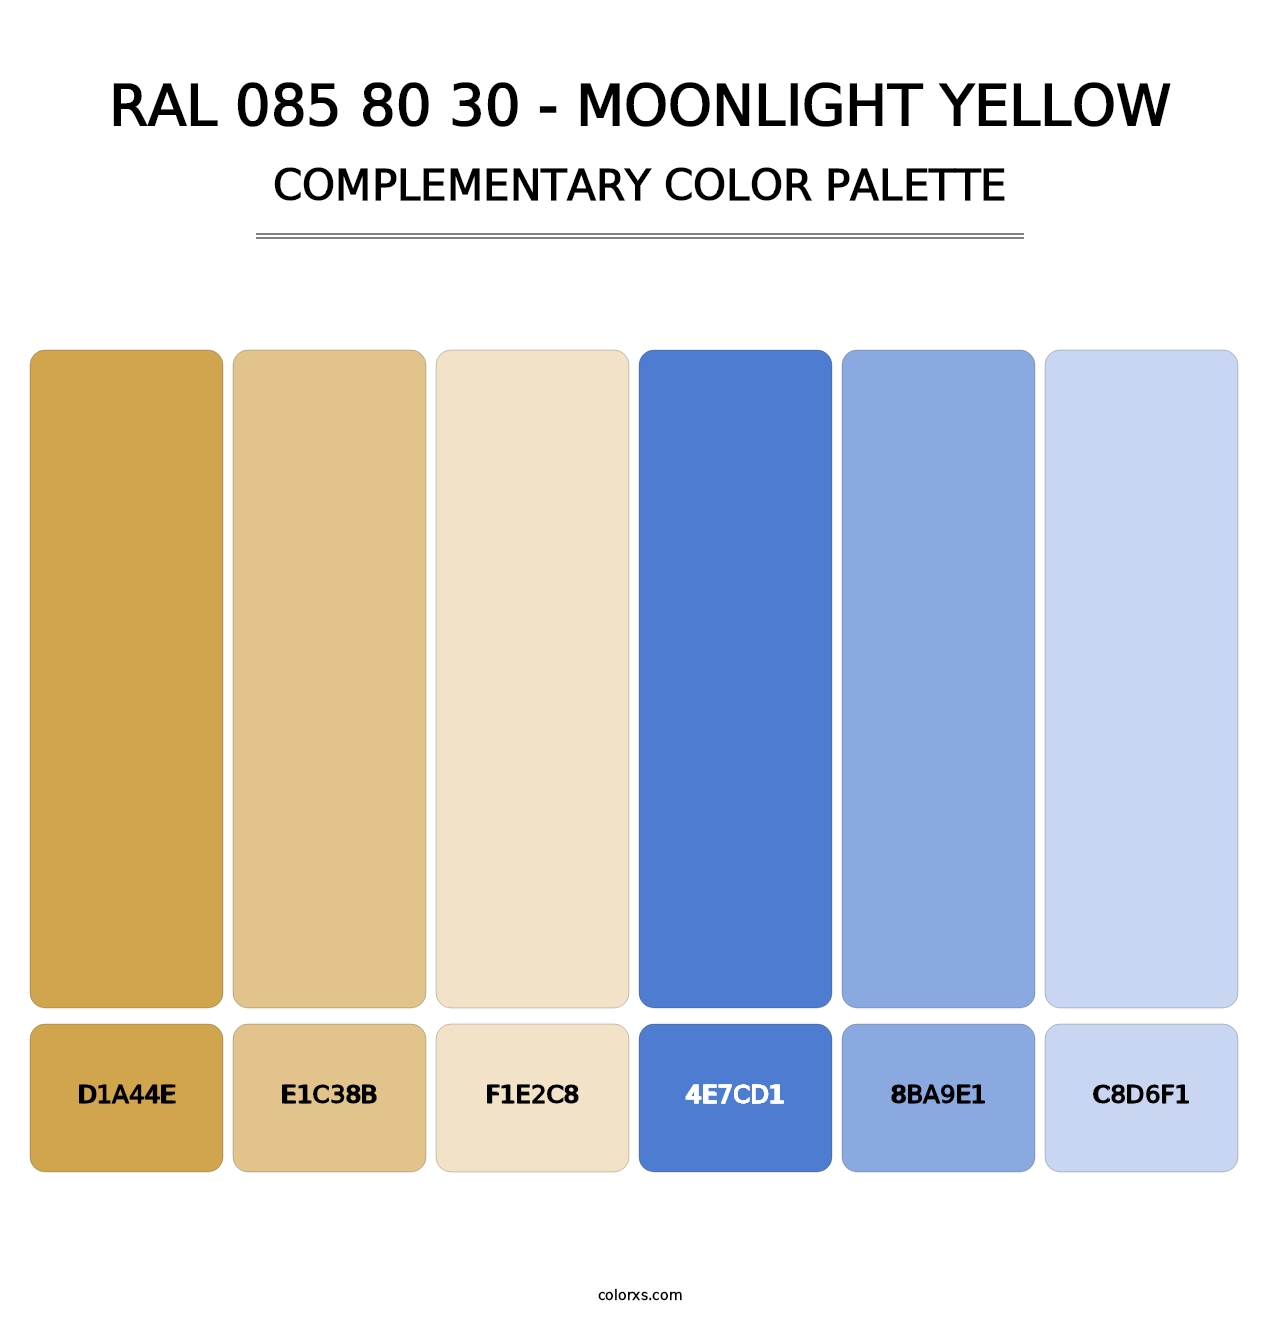 RAL 085 80 30 - Moonlight Yellow - Complementary Color Palette